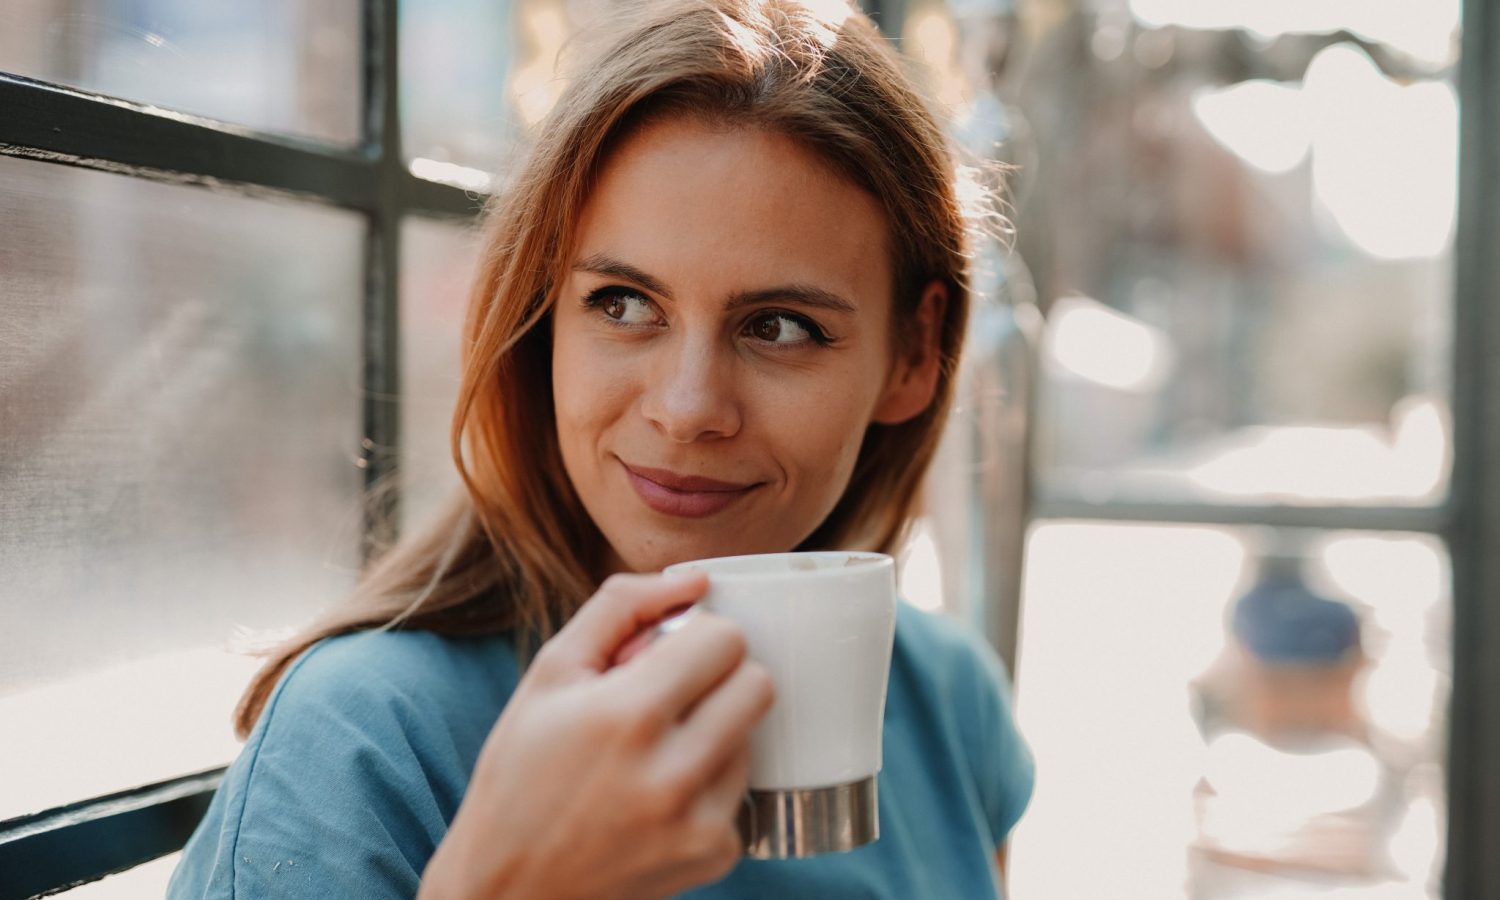 This Type Of Coffee Is Best For Your Heart Health